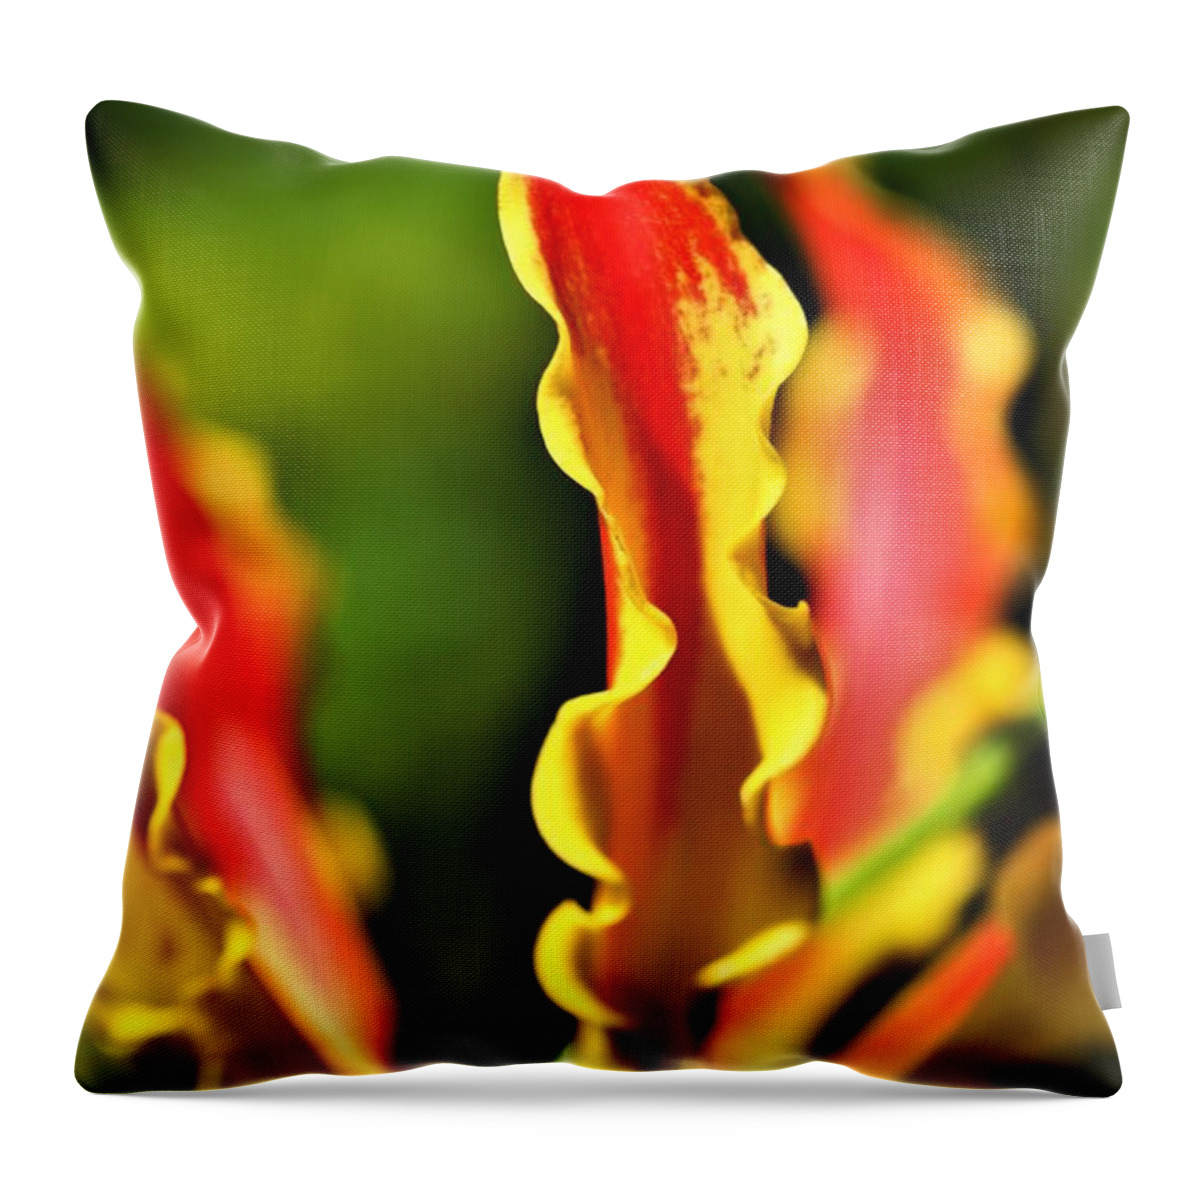 Yellow Throw Pillow featuring the photograph Gloriosa Lilly by Tracey Lee Cassin